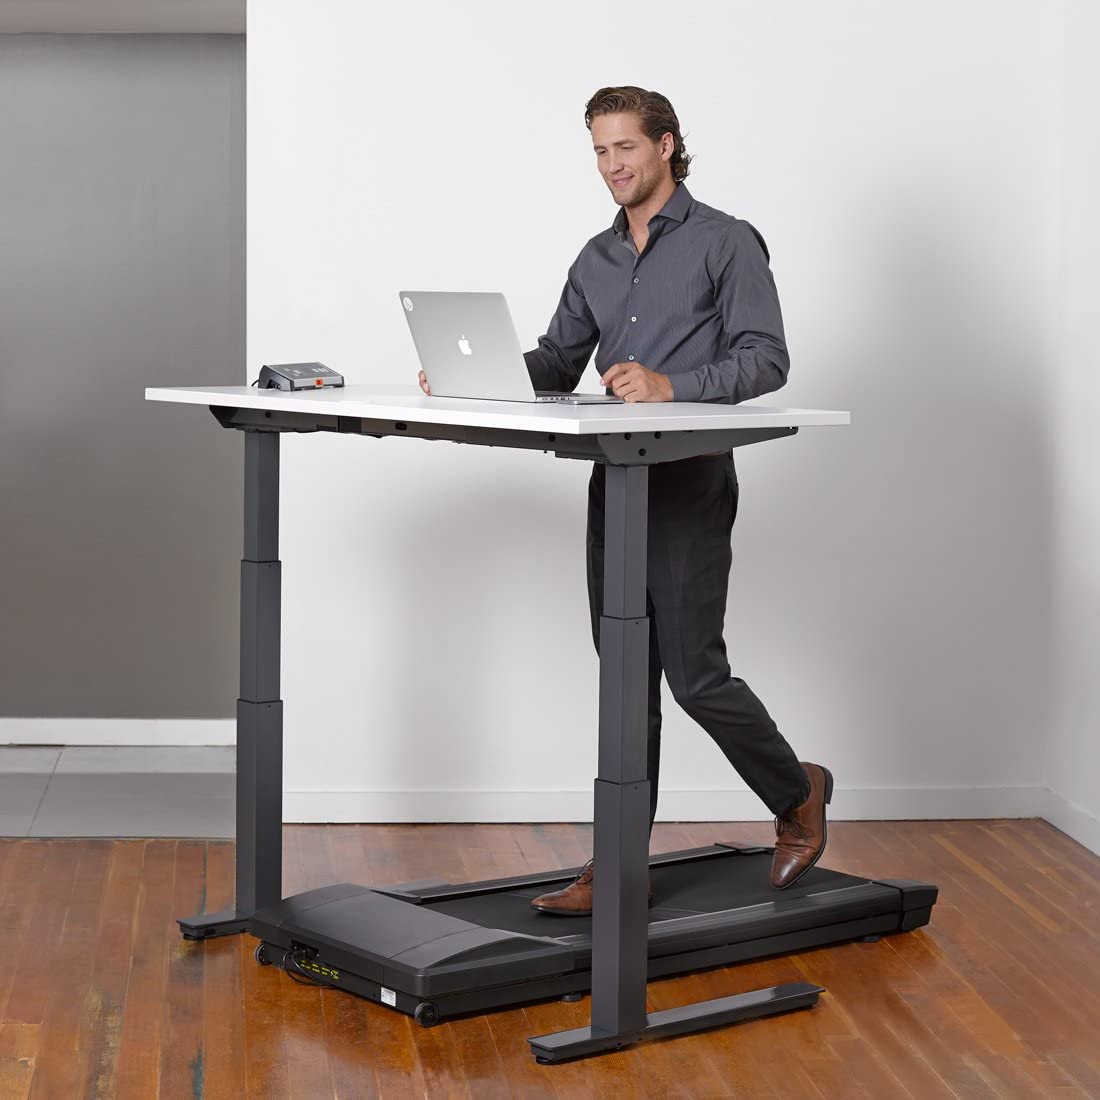 LifeSpan Portable Walking Under Desk Treadmill for Standing Desk Workout - image 2 of 6